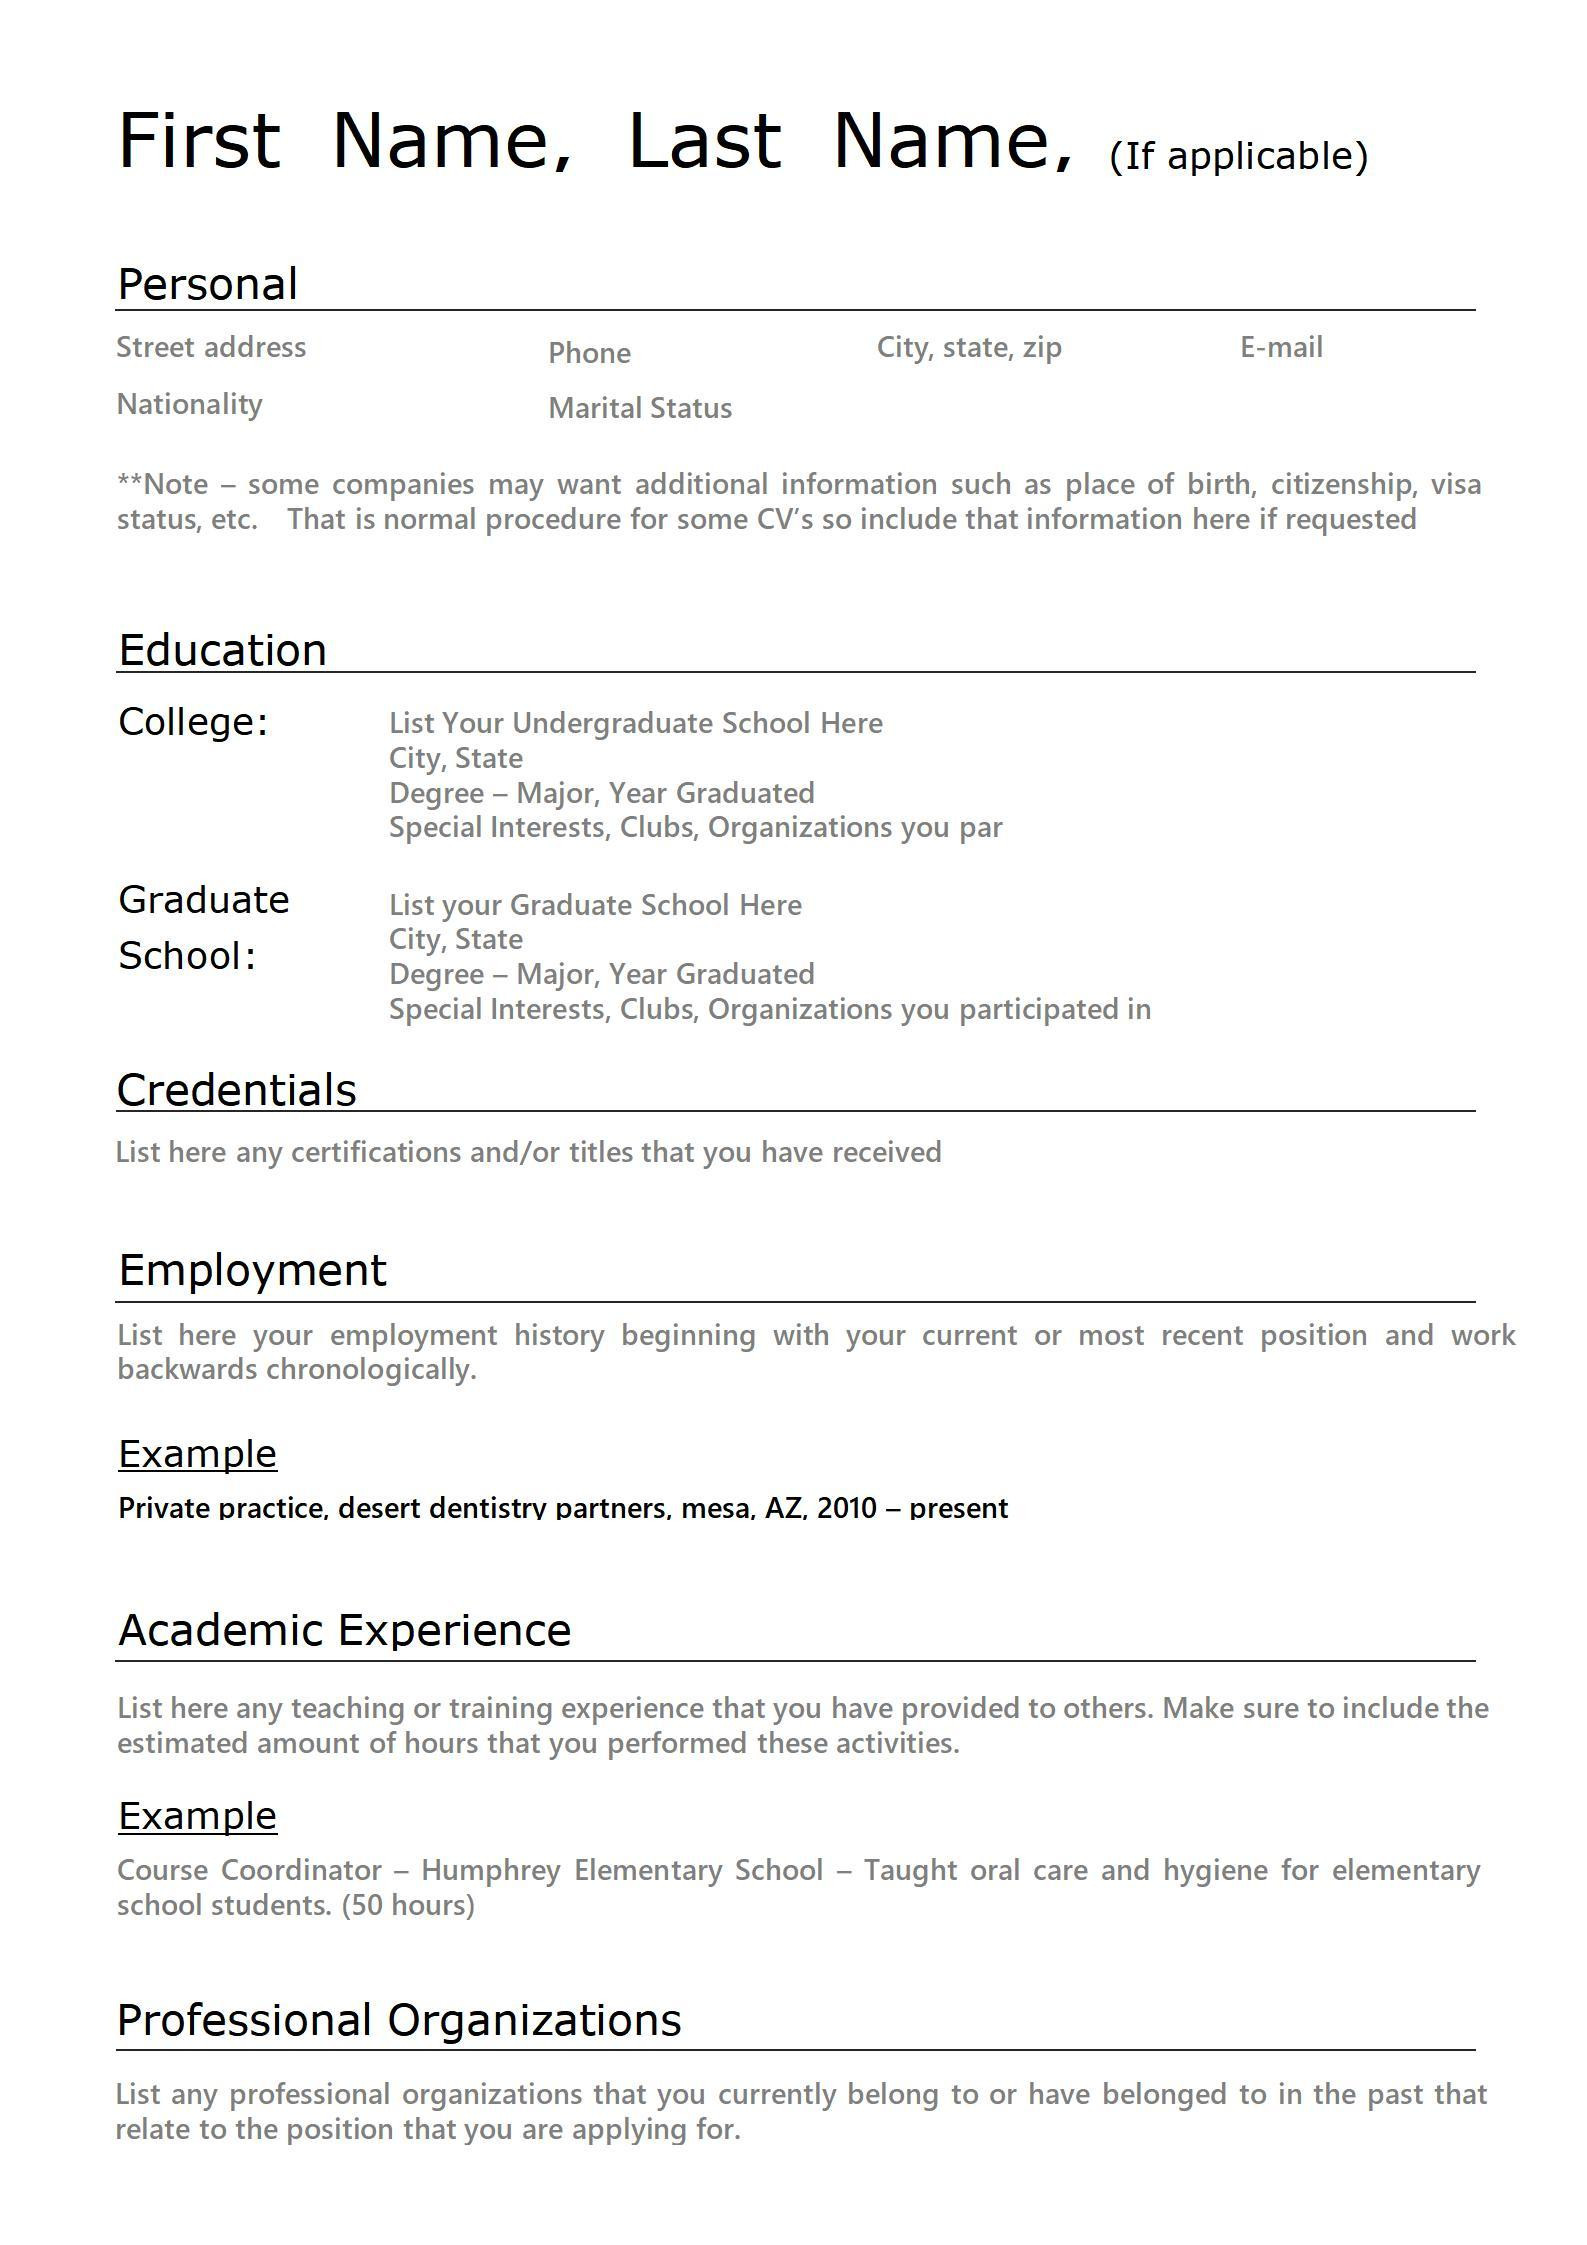 First Job No Experience Resume Sample First-time Resume with No Experience Samples Wps Office Academy